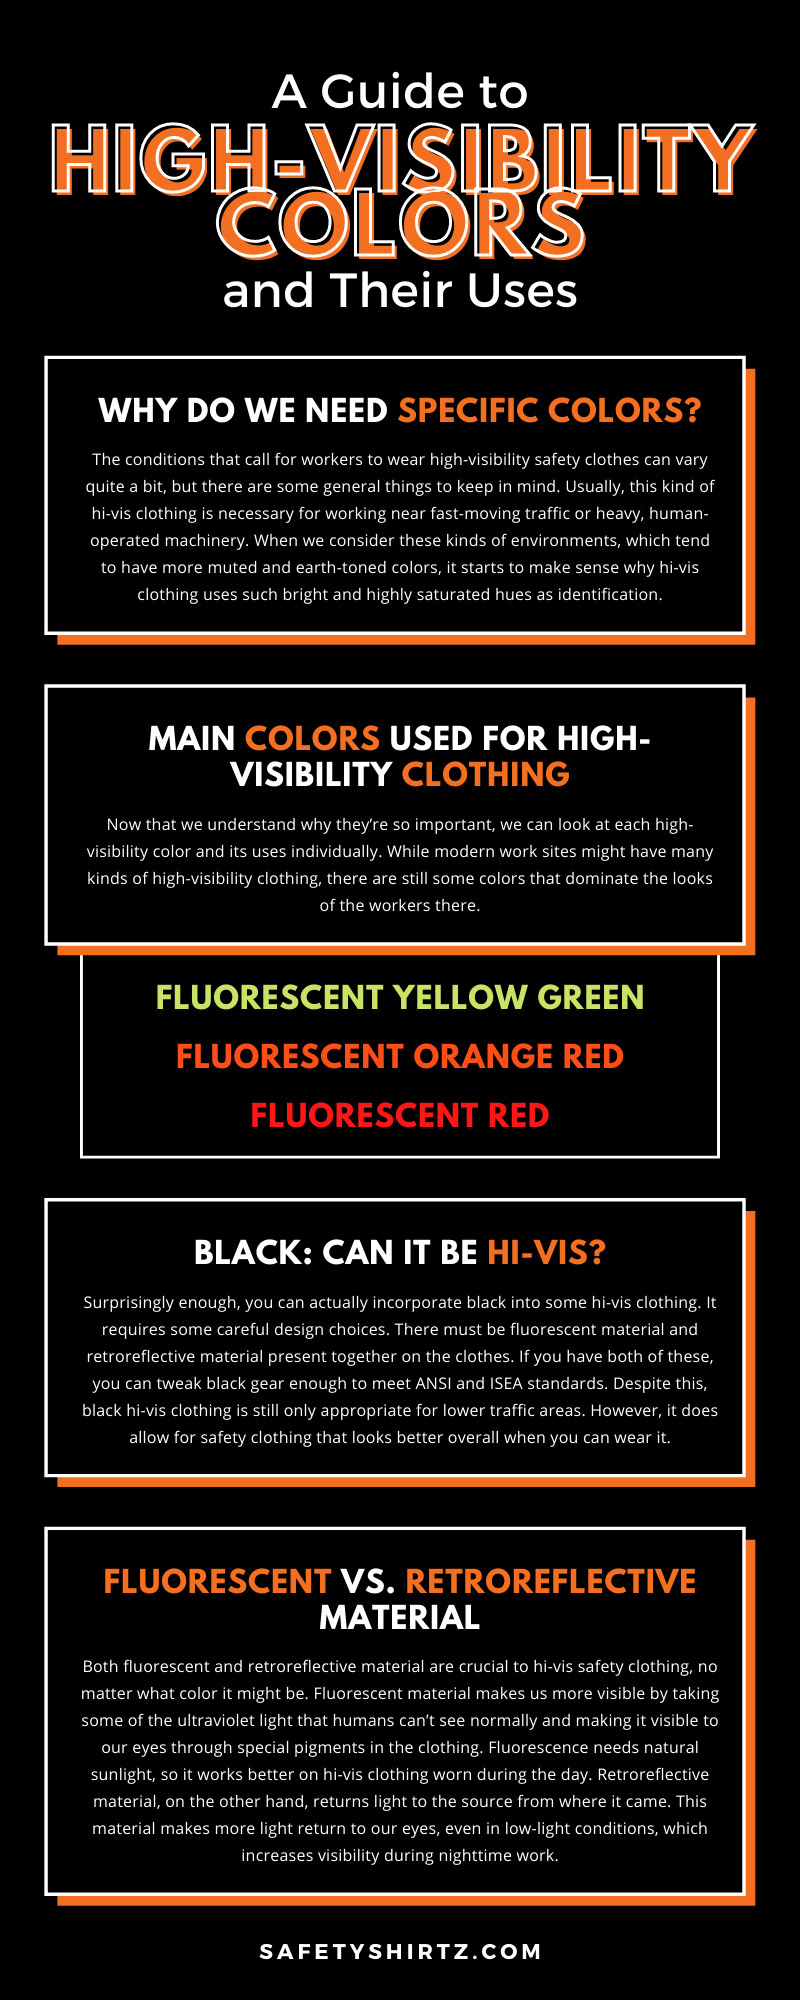 A Guide to High-Visibility Colors and Their Uses